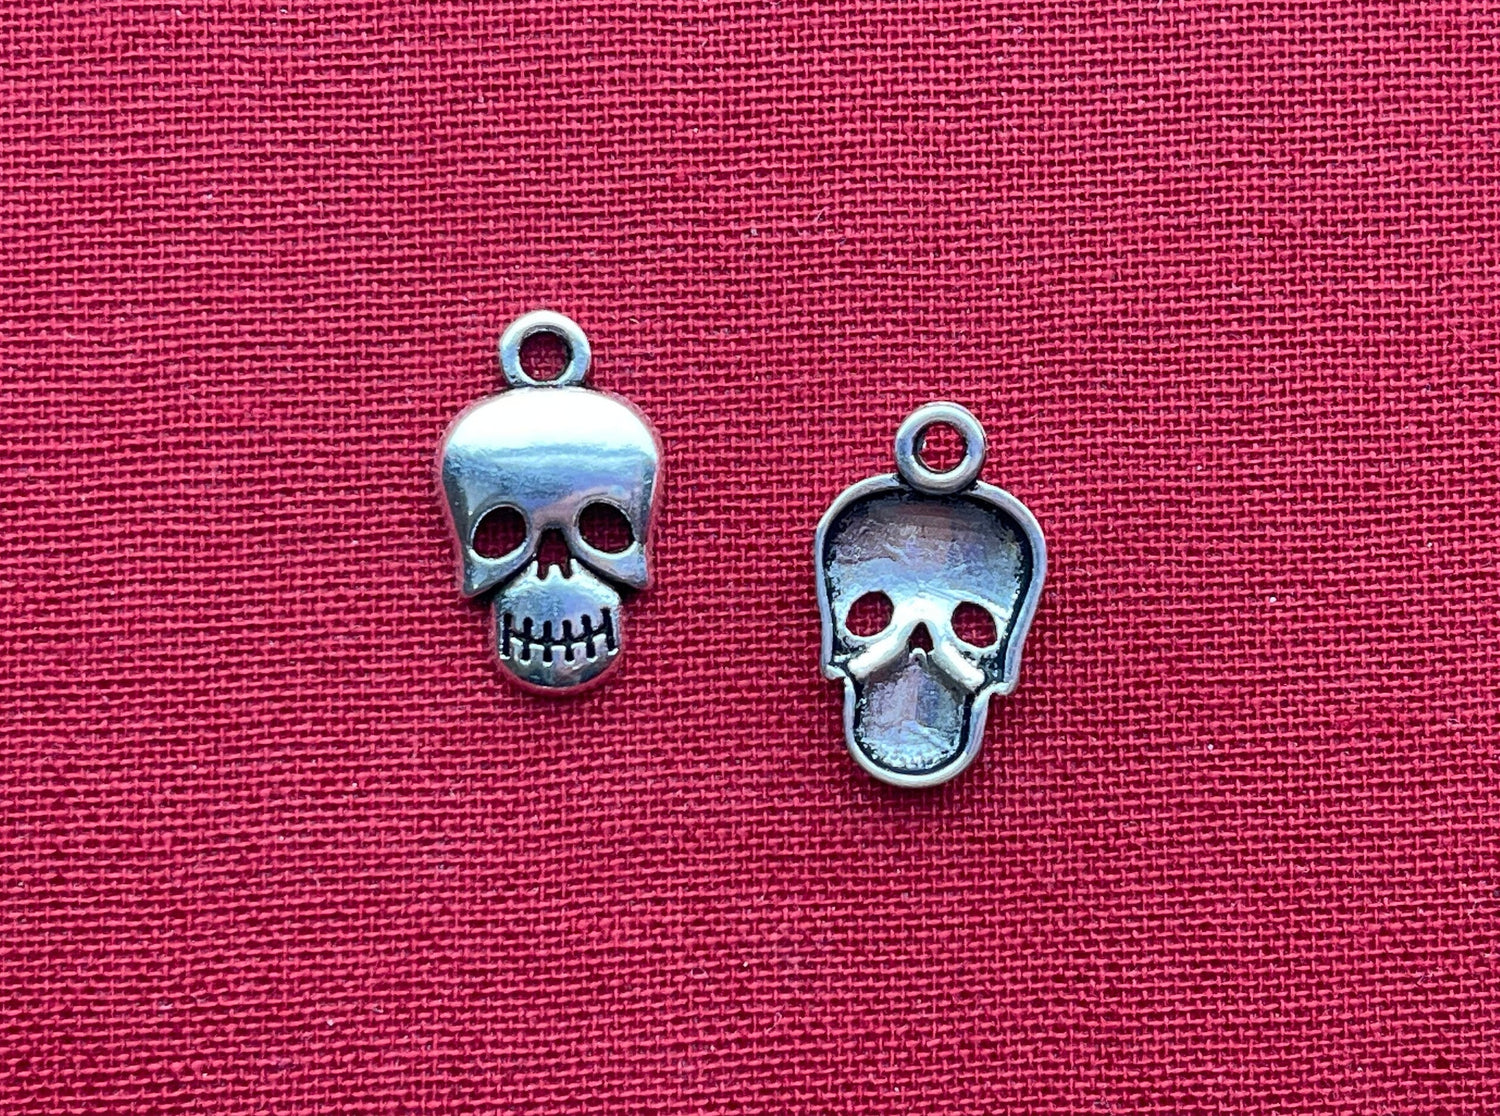 Skull & Spider Silver Charm set -Spooky Halloween charms, pendant, drop-antique silver